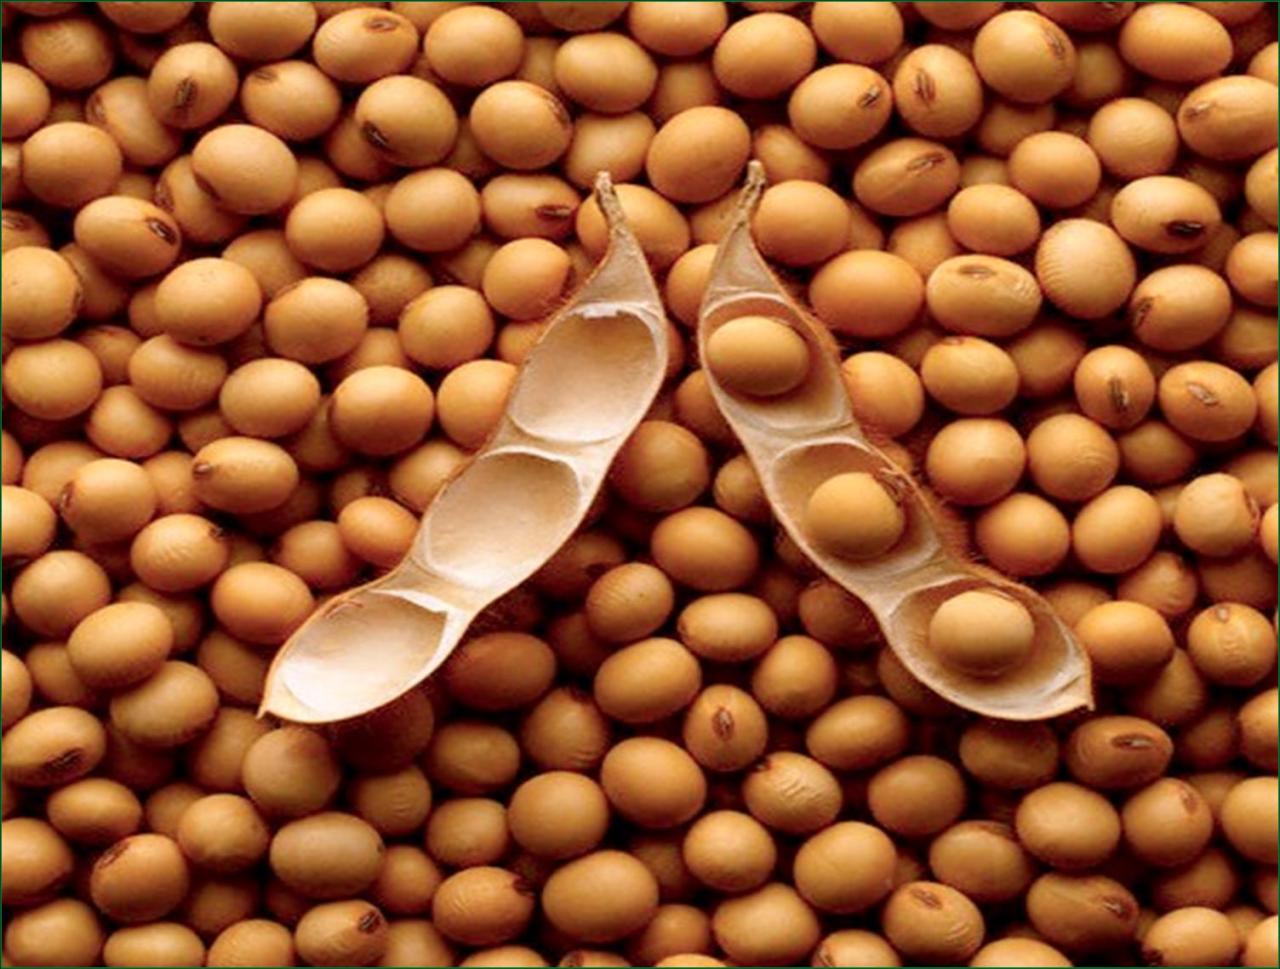 Soybean cultivation to be launched in country